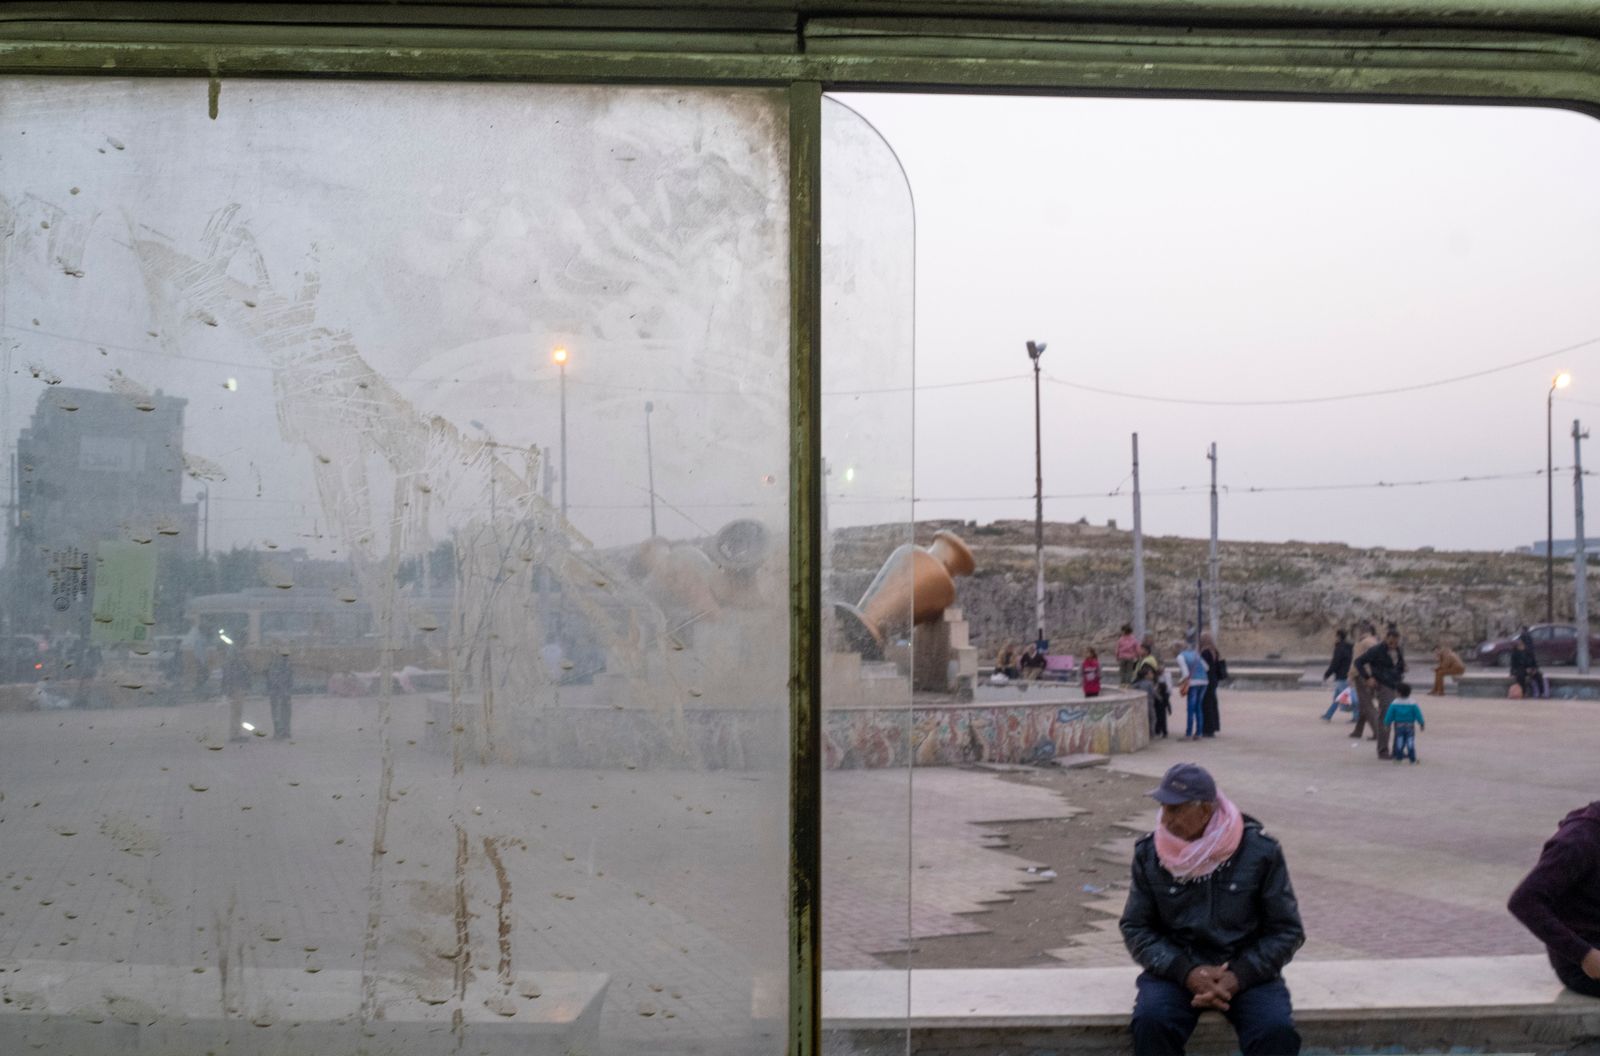 © Fatma Fahmy - View of an unidentified man as he sits outside a tram carriage in the wardien area, Alexandria, Egypt, April 6, 2019.